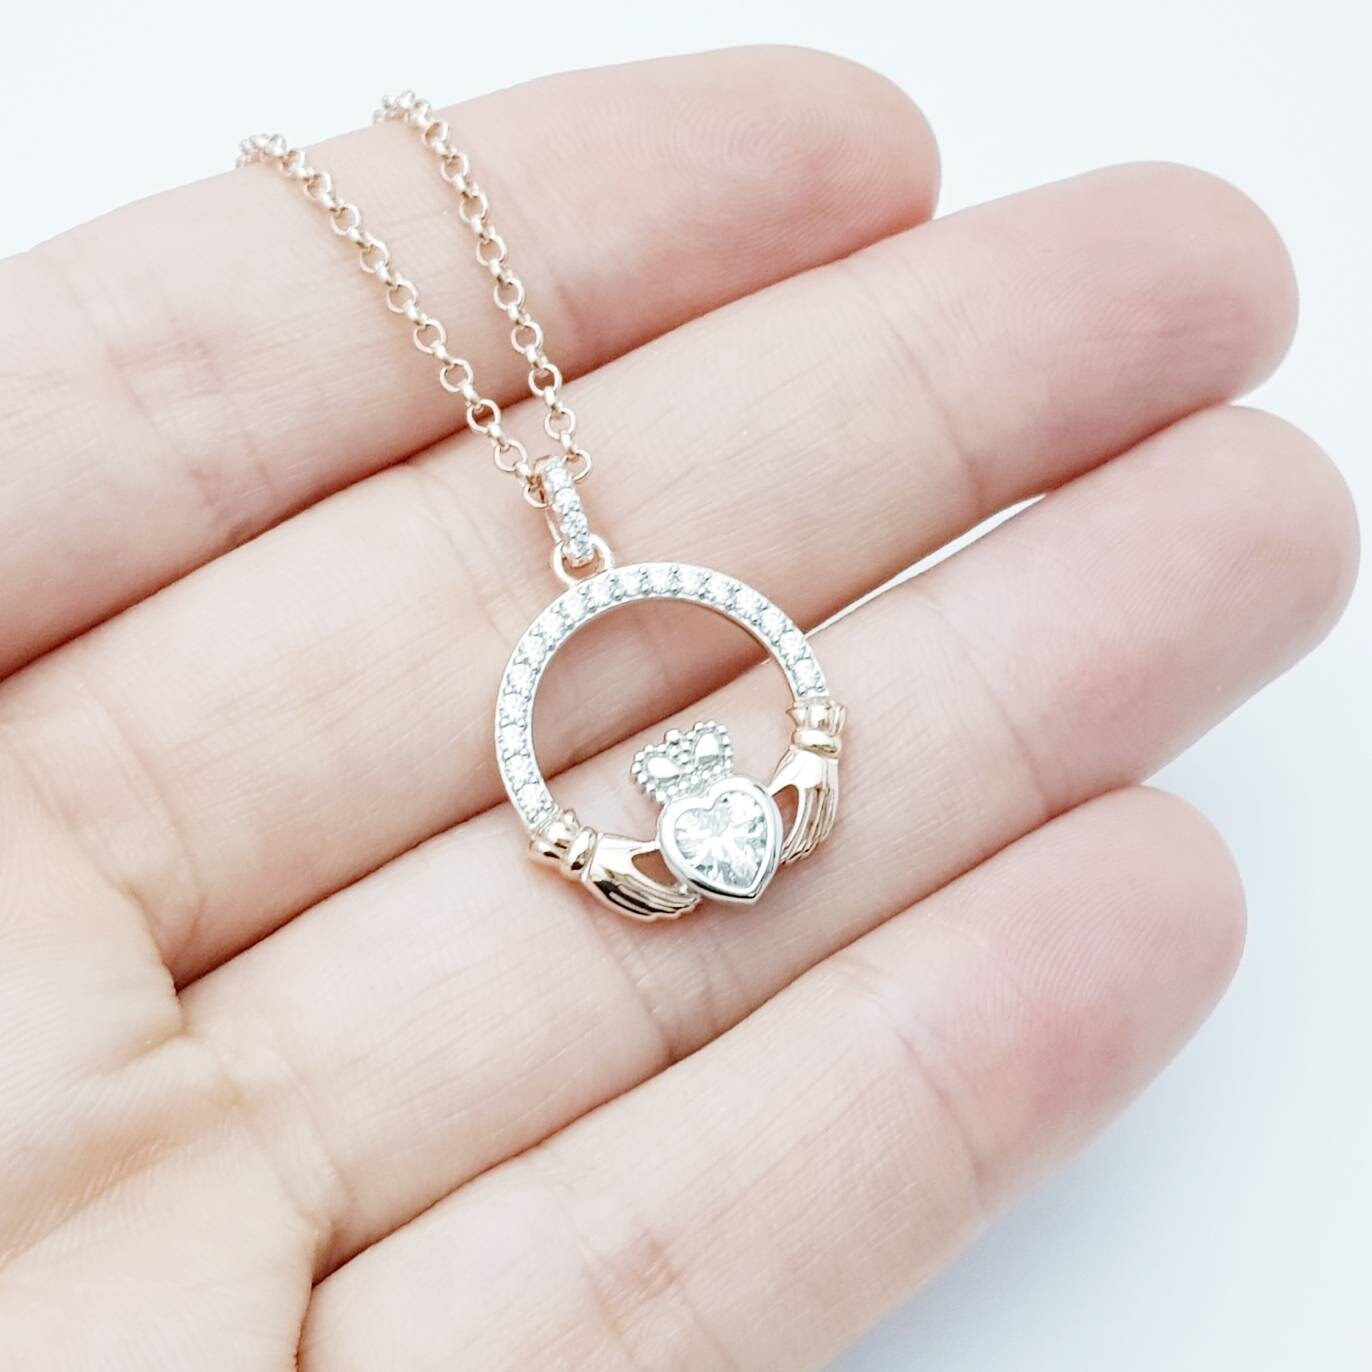 Sterling silver rose gold claddagh necklace, irish necklace with rose gold plating